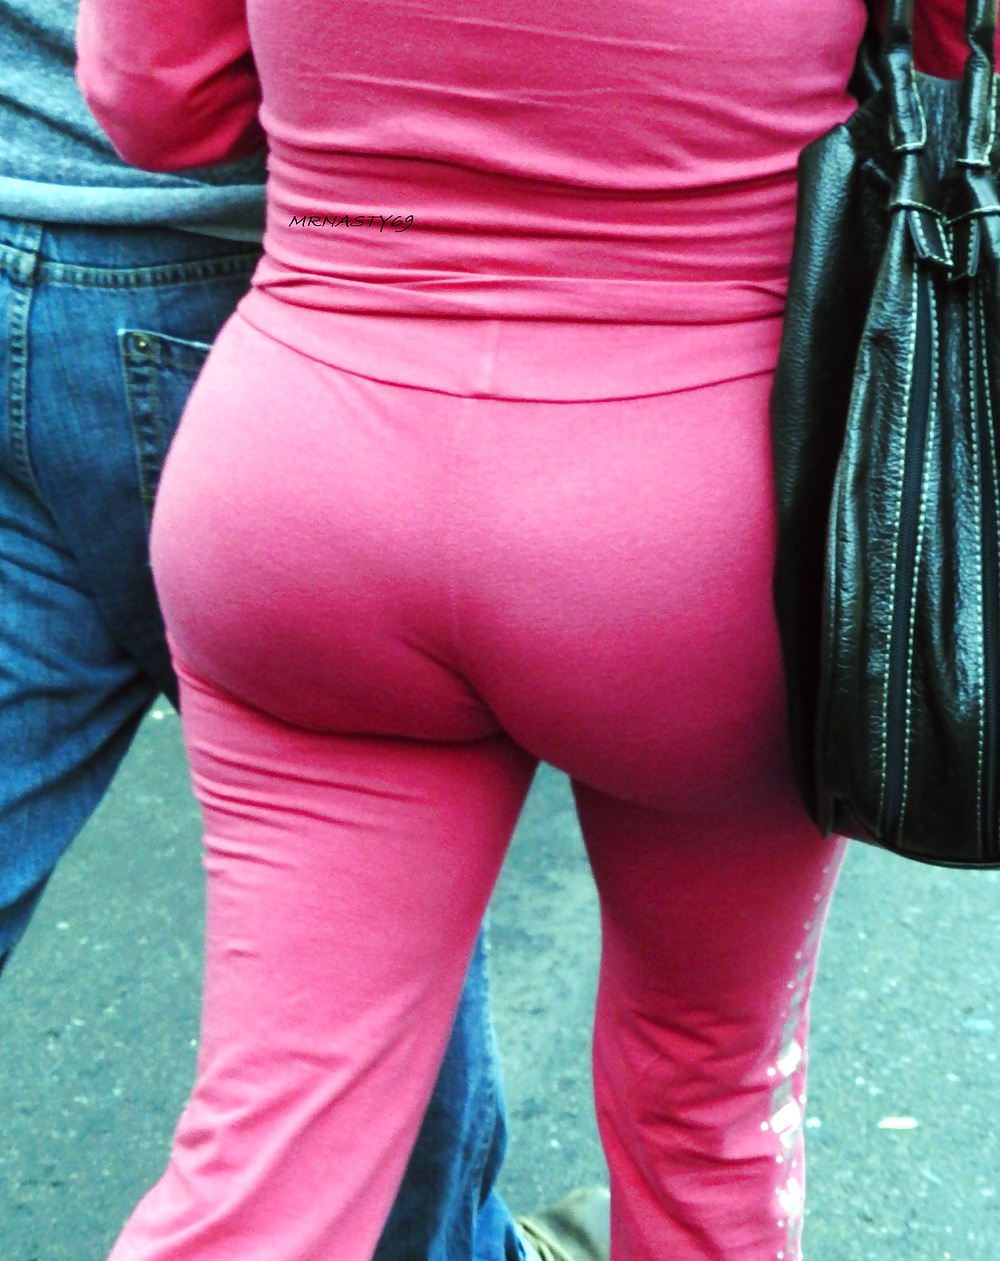 Latina Wife With Big Ass In Tight Pink Pants #20920044